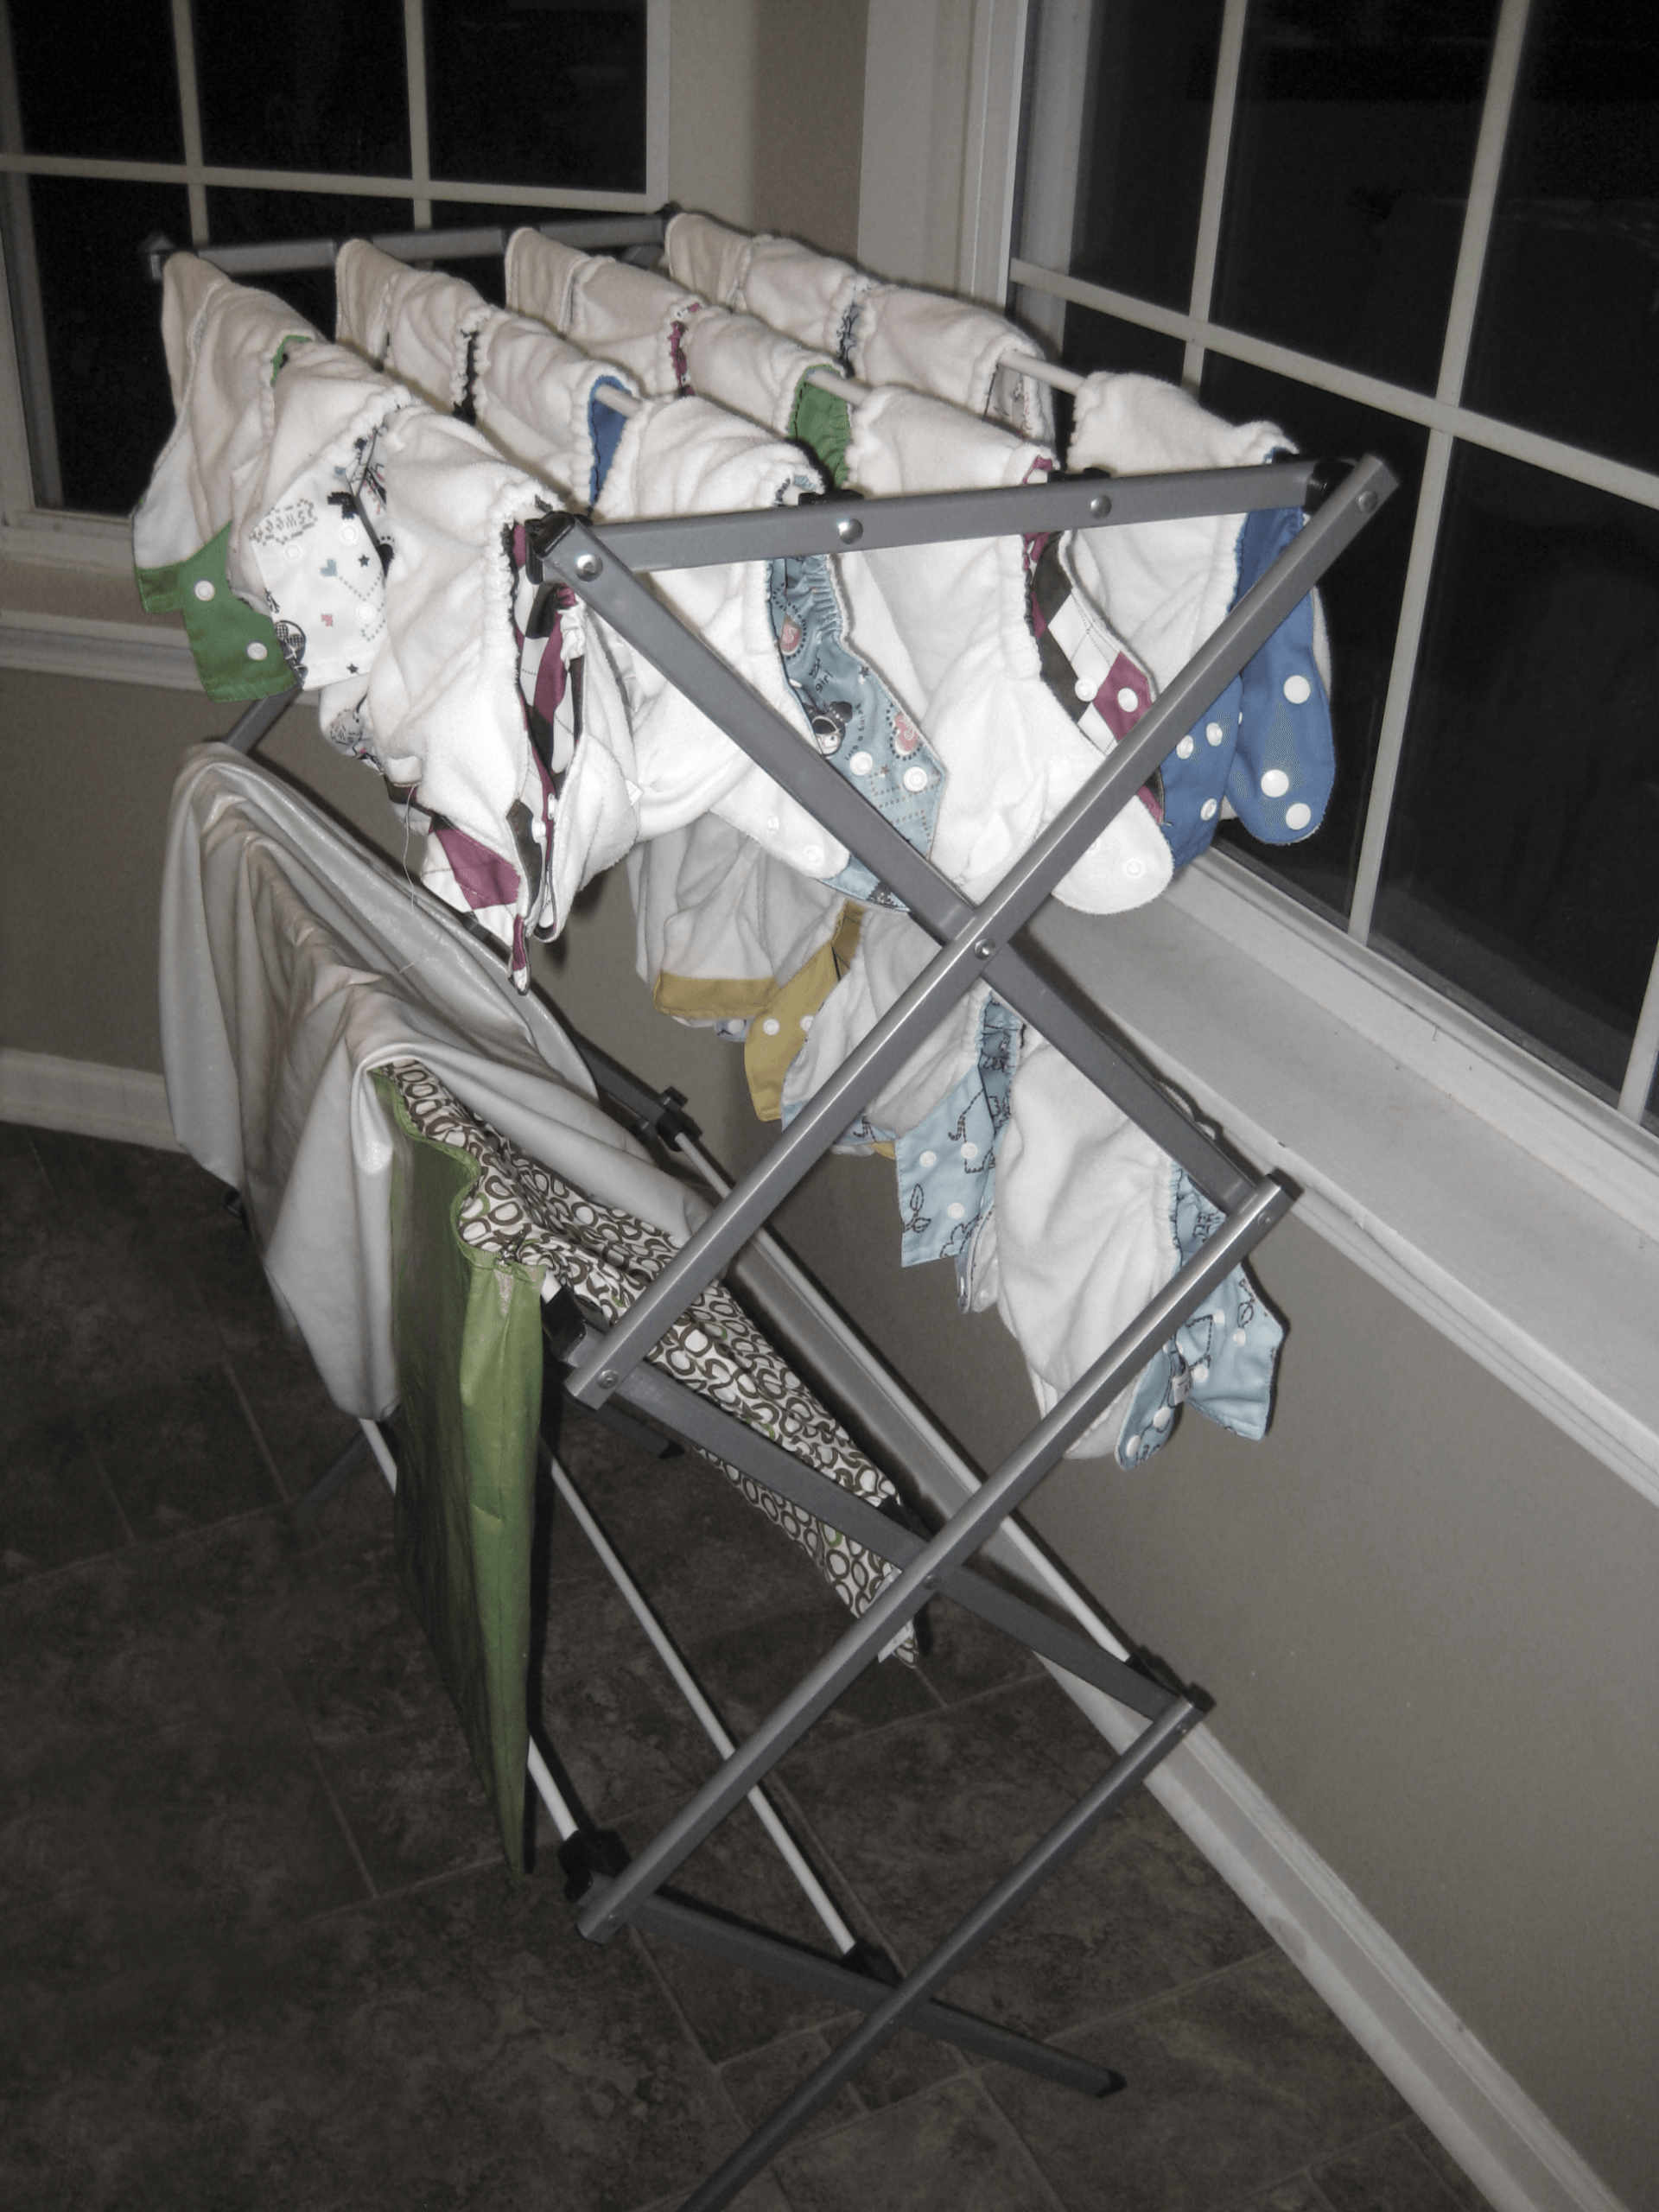 Cloth diaper dying racks are essential when diapering with reusable diapers